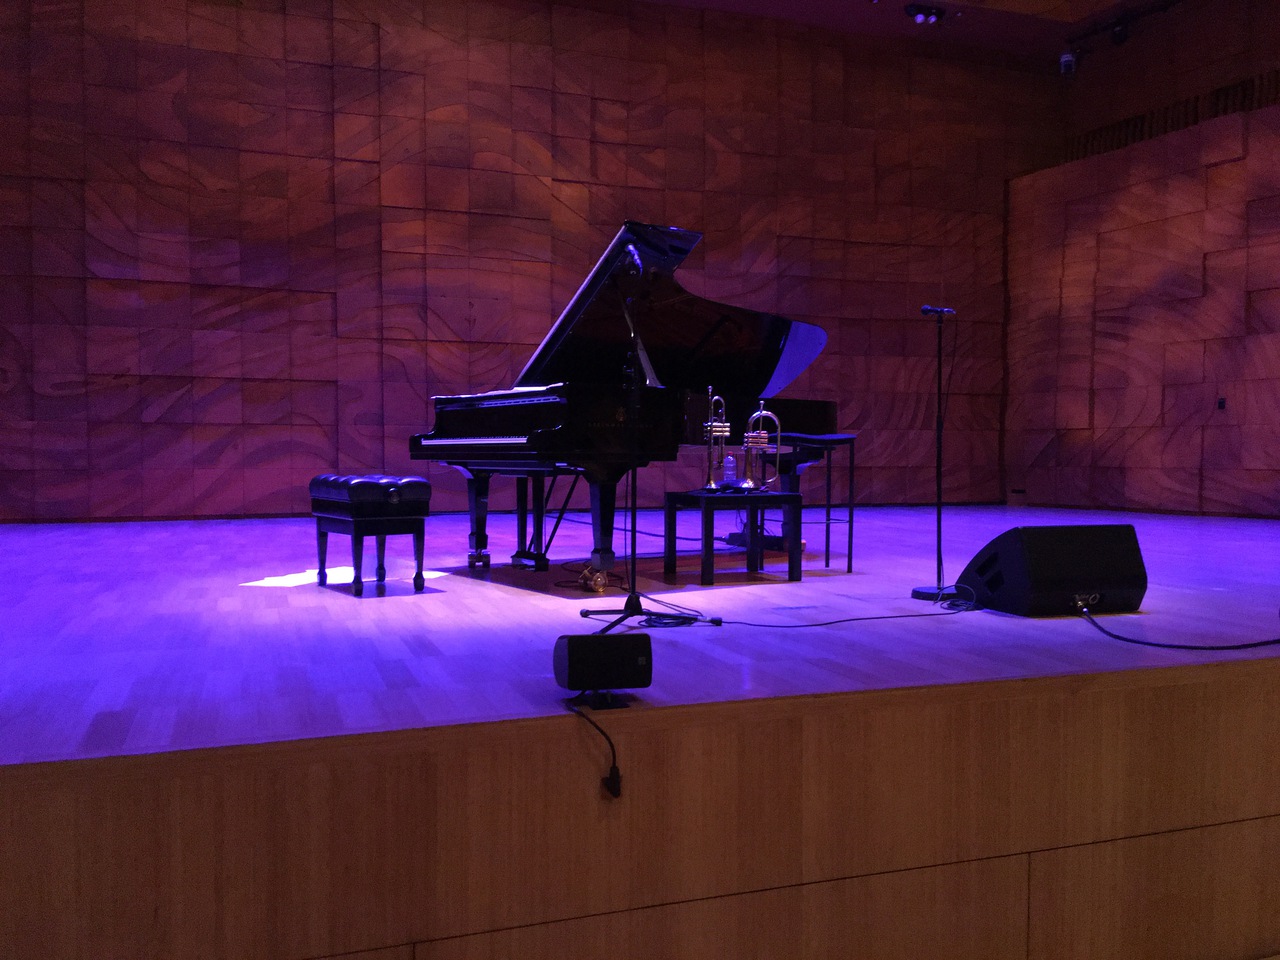 A large concert hall bathed in soft purple lights, a grand piano and a couple of small brass horns sit in the middle of the stage